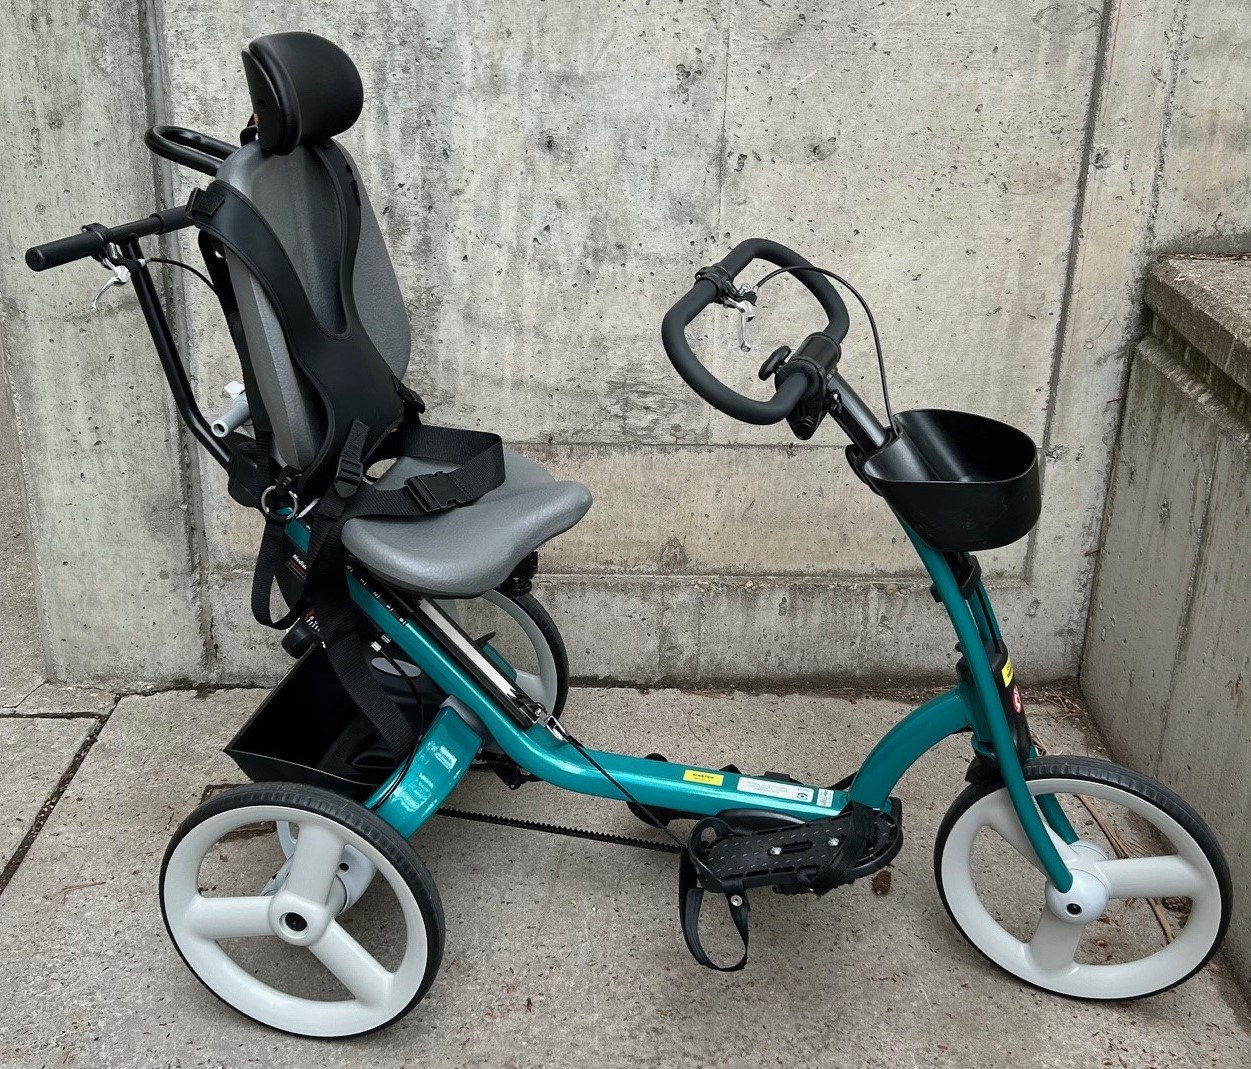 Thumbnail of New Syle Rifton Adaptive Tricycle- LARGE.